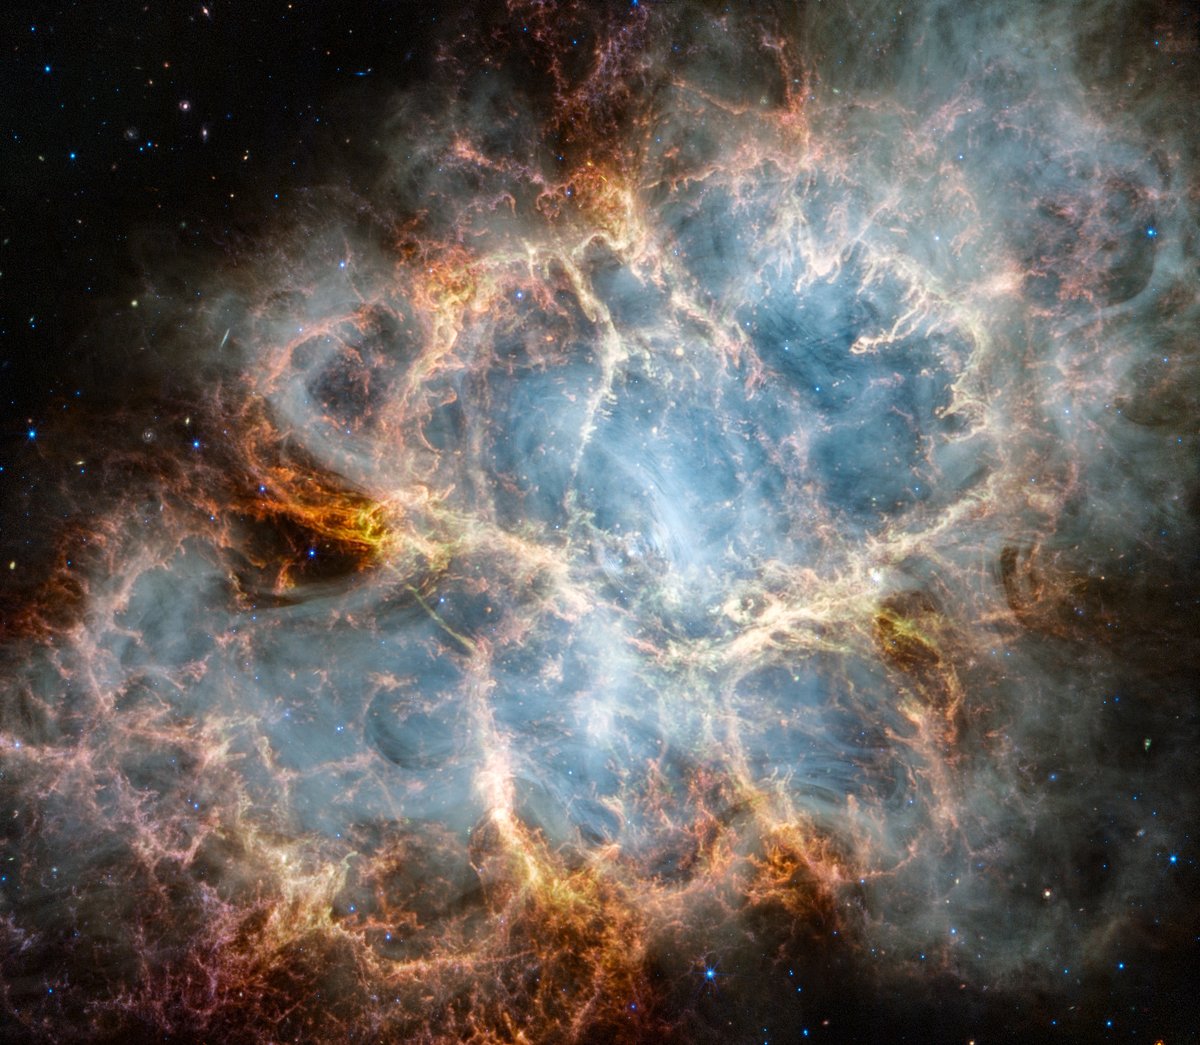 It’s Monday. Feeling crabby? 🦀 6,500 light-years away lies the Crab Nebula, the remains of an exploded star. While it is a well-studied target, Webb’s infrared sensitivity and resolution offer new clues into the makeup and origins of this nebula: go.nasa.gov/46Qlaa6